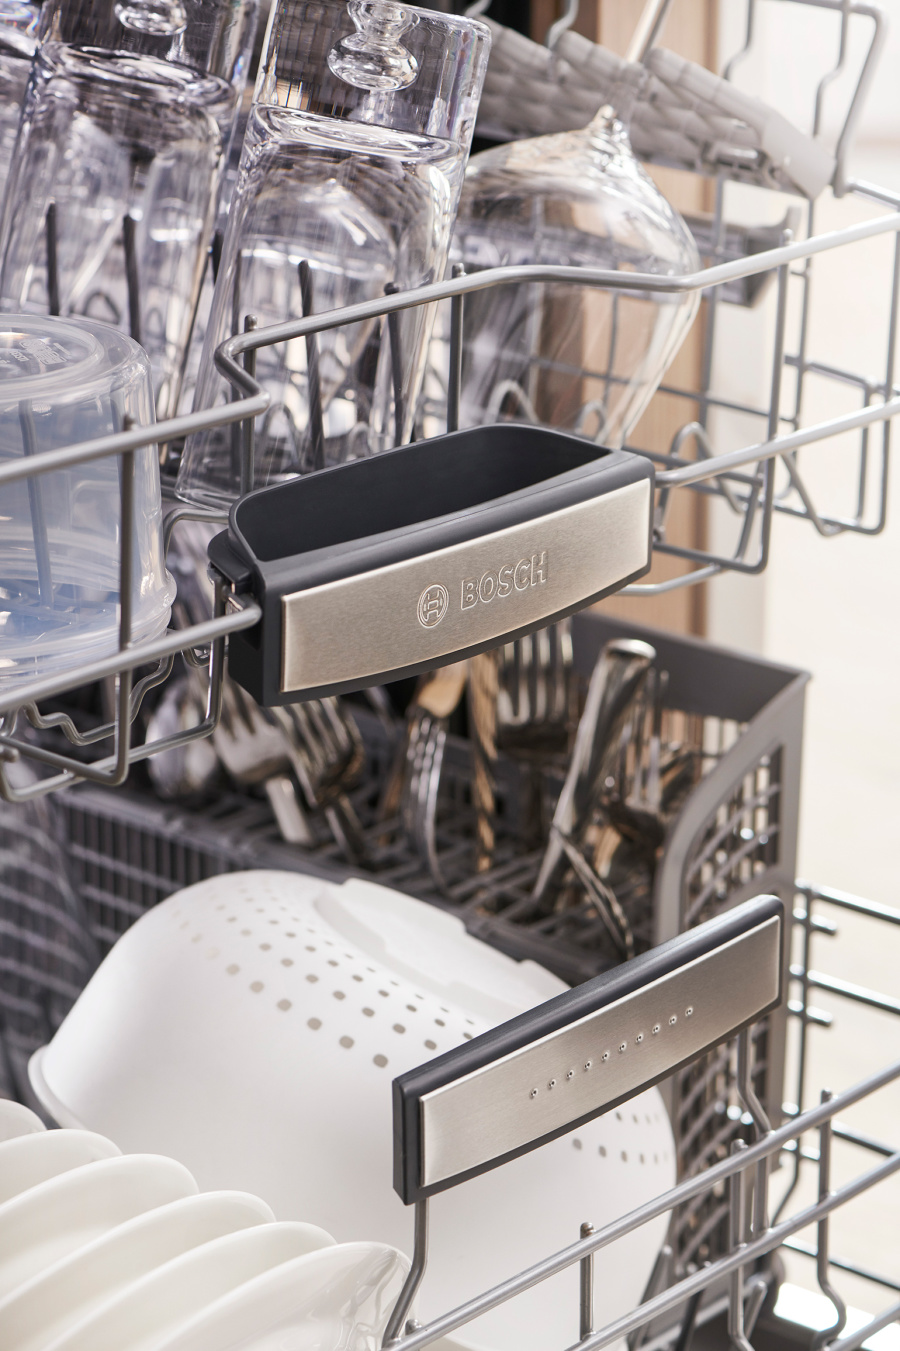 Bosch 800 Series Dishwasher Giving You Peace of Mind #ad @BOSCHHOMEUS @BestBuy